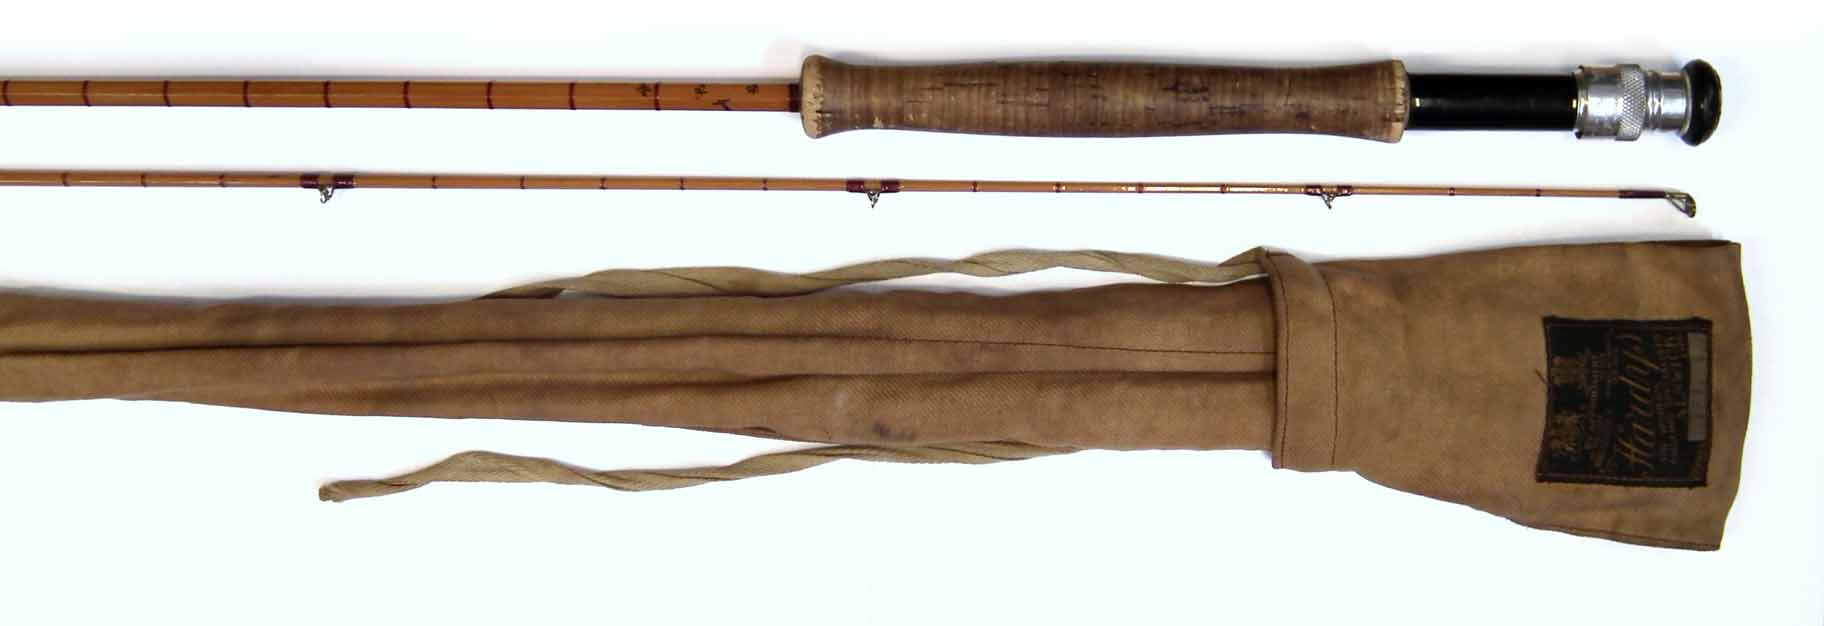 Hardy's The Perfection Palakona 9ft split cane fishing rod, with original maker's bag, serial number